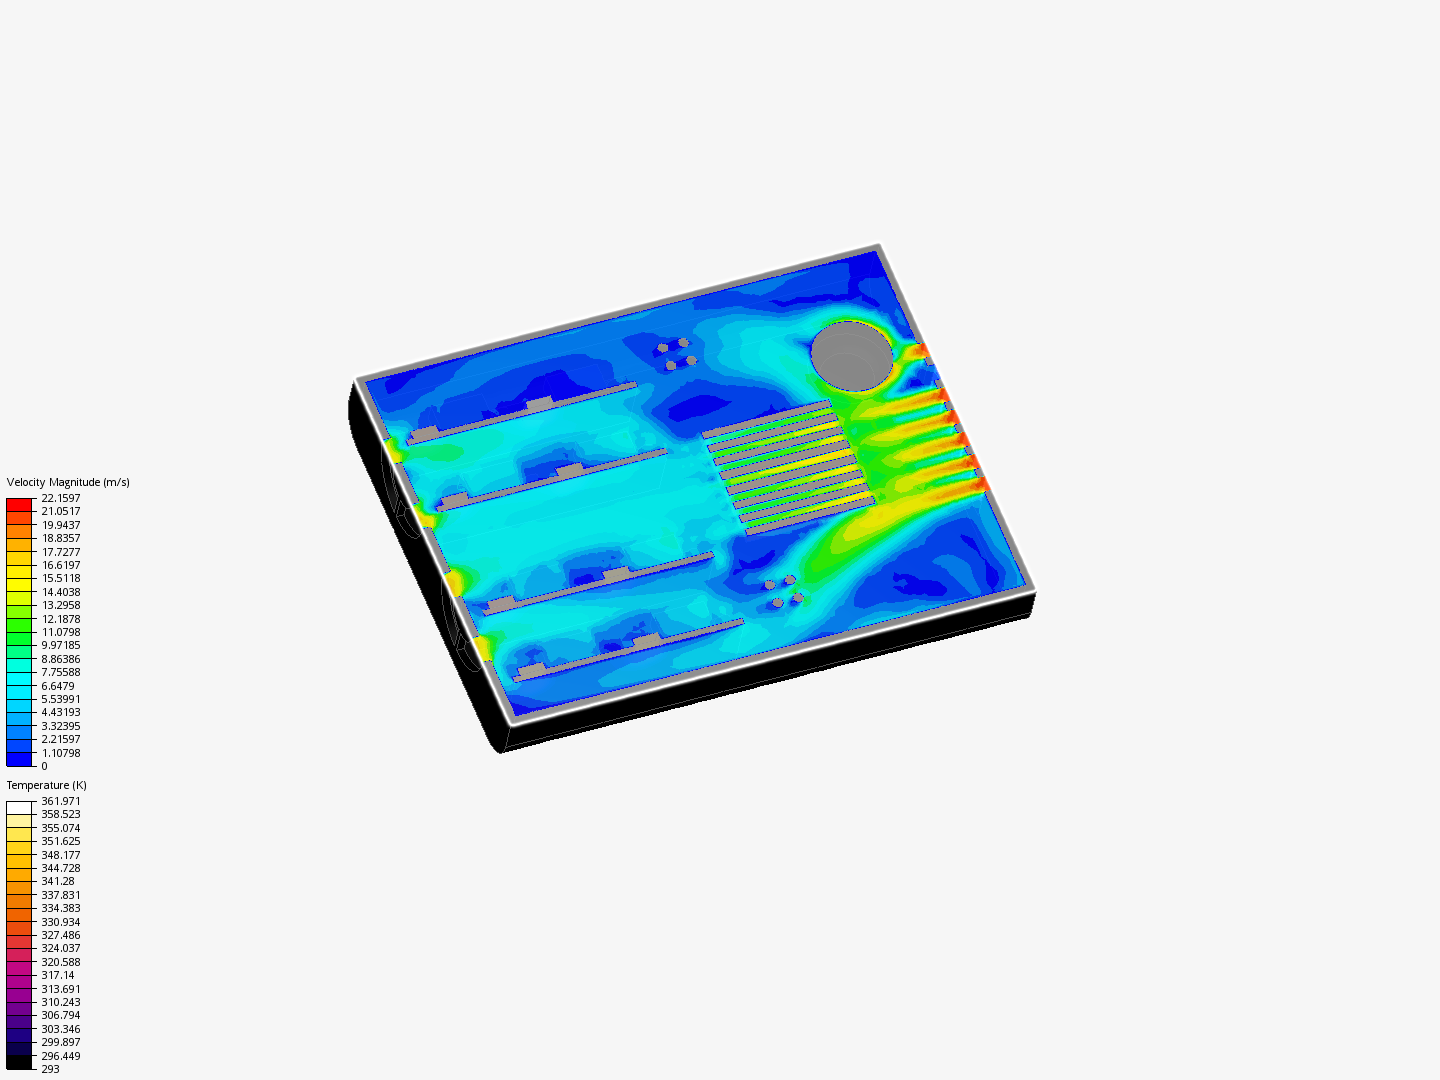 Advanced Tutorial: Thermal Management of an Electronics Box using CHT image